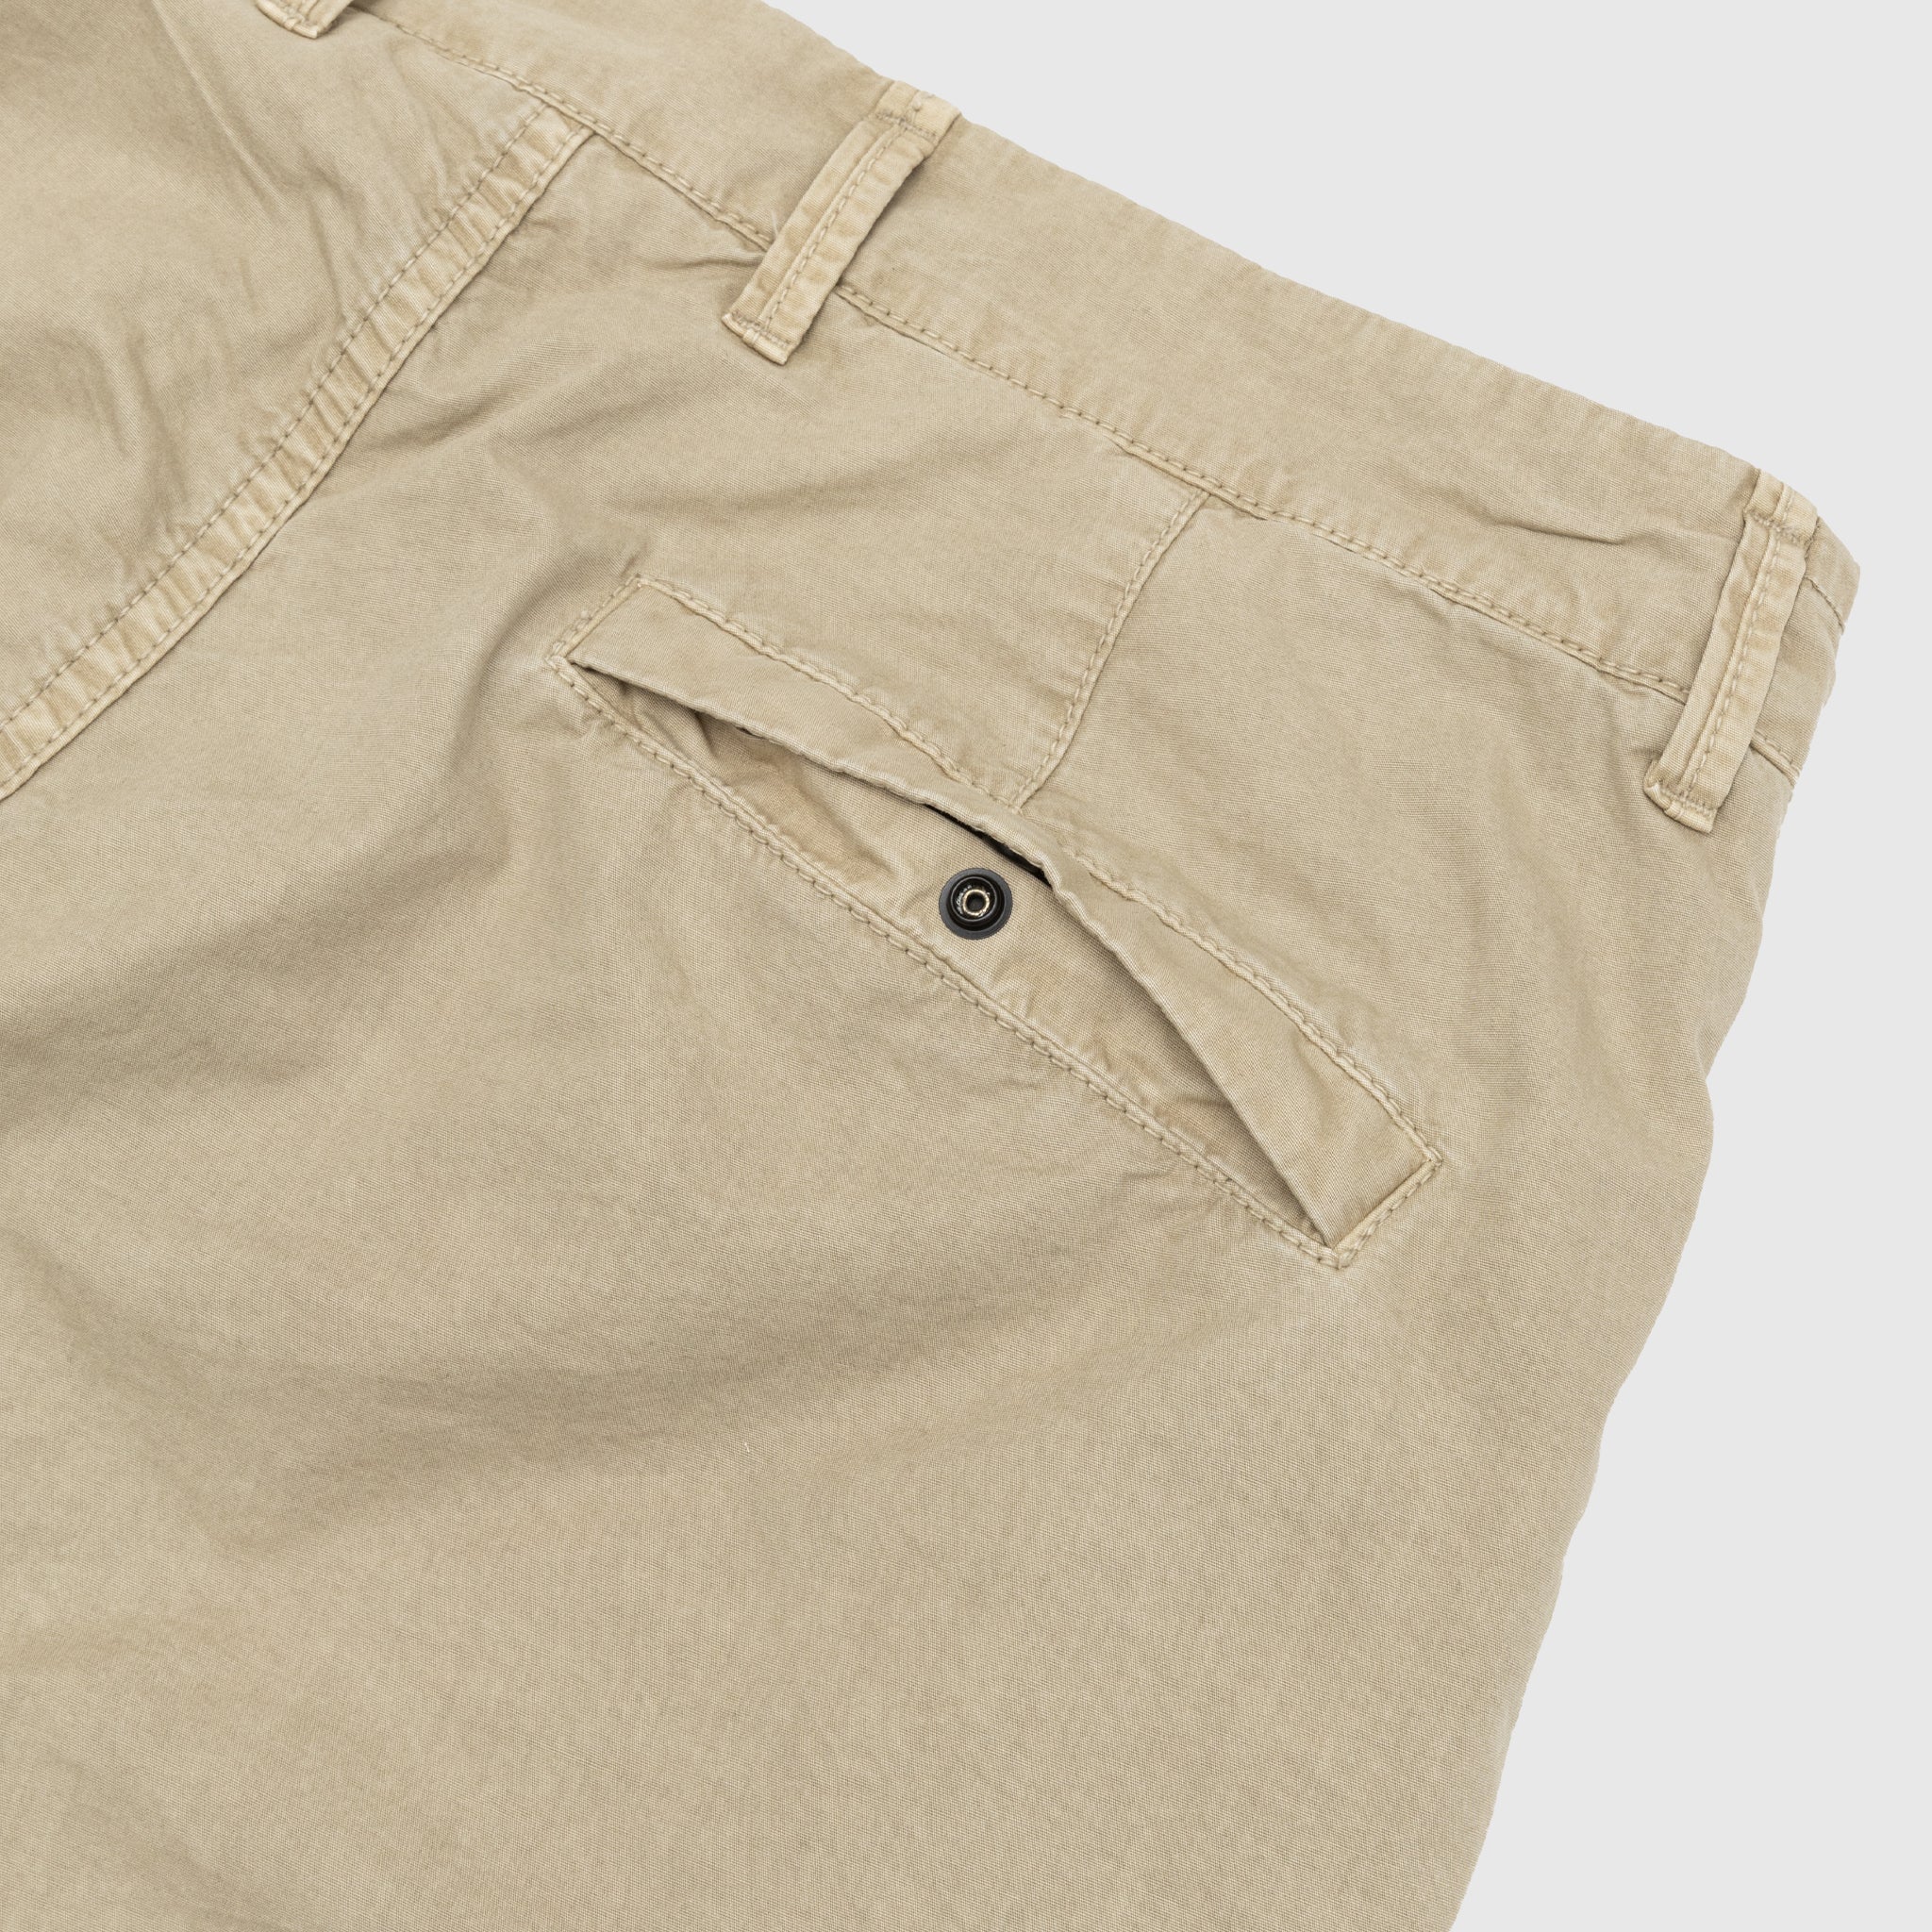 'OLD' TREATMENT CARGO PANTS